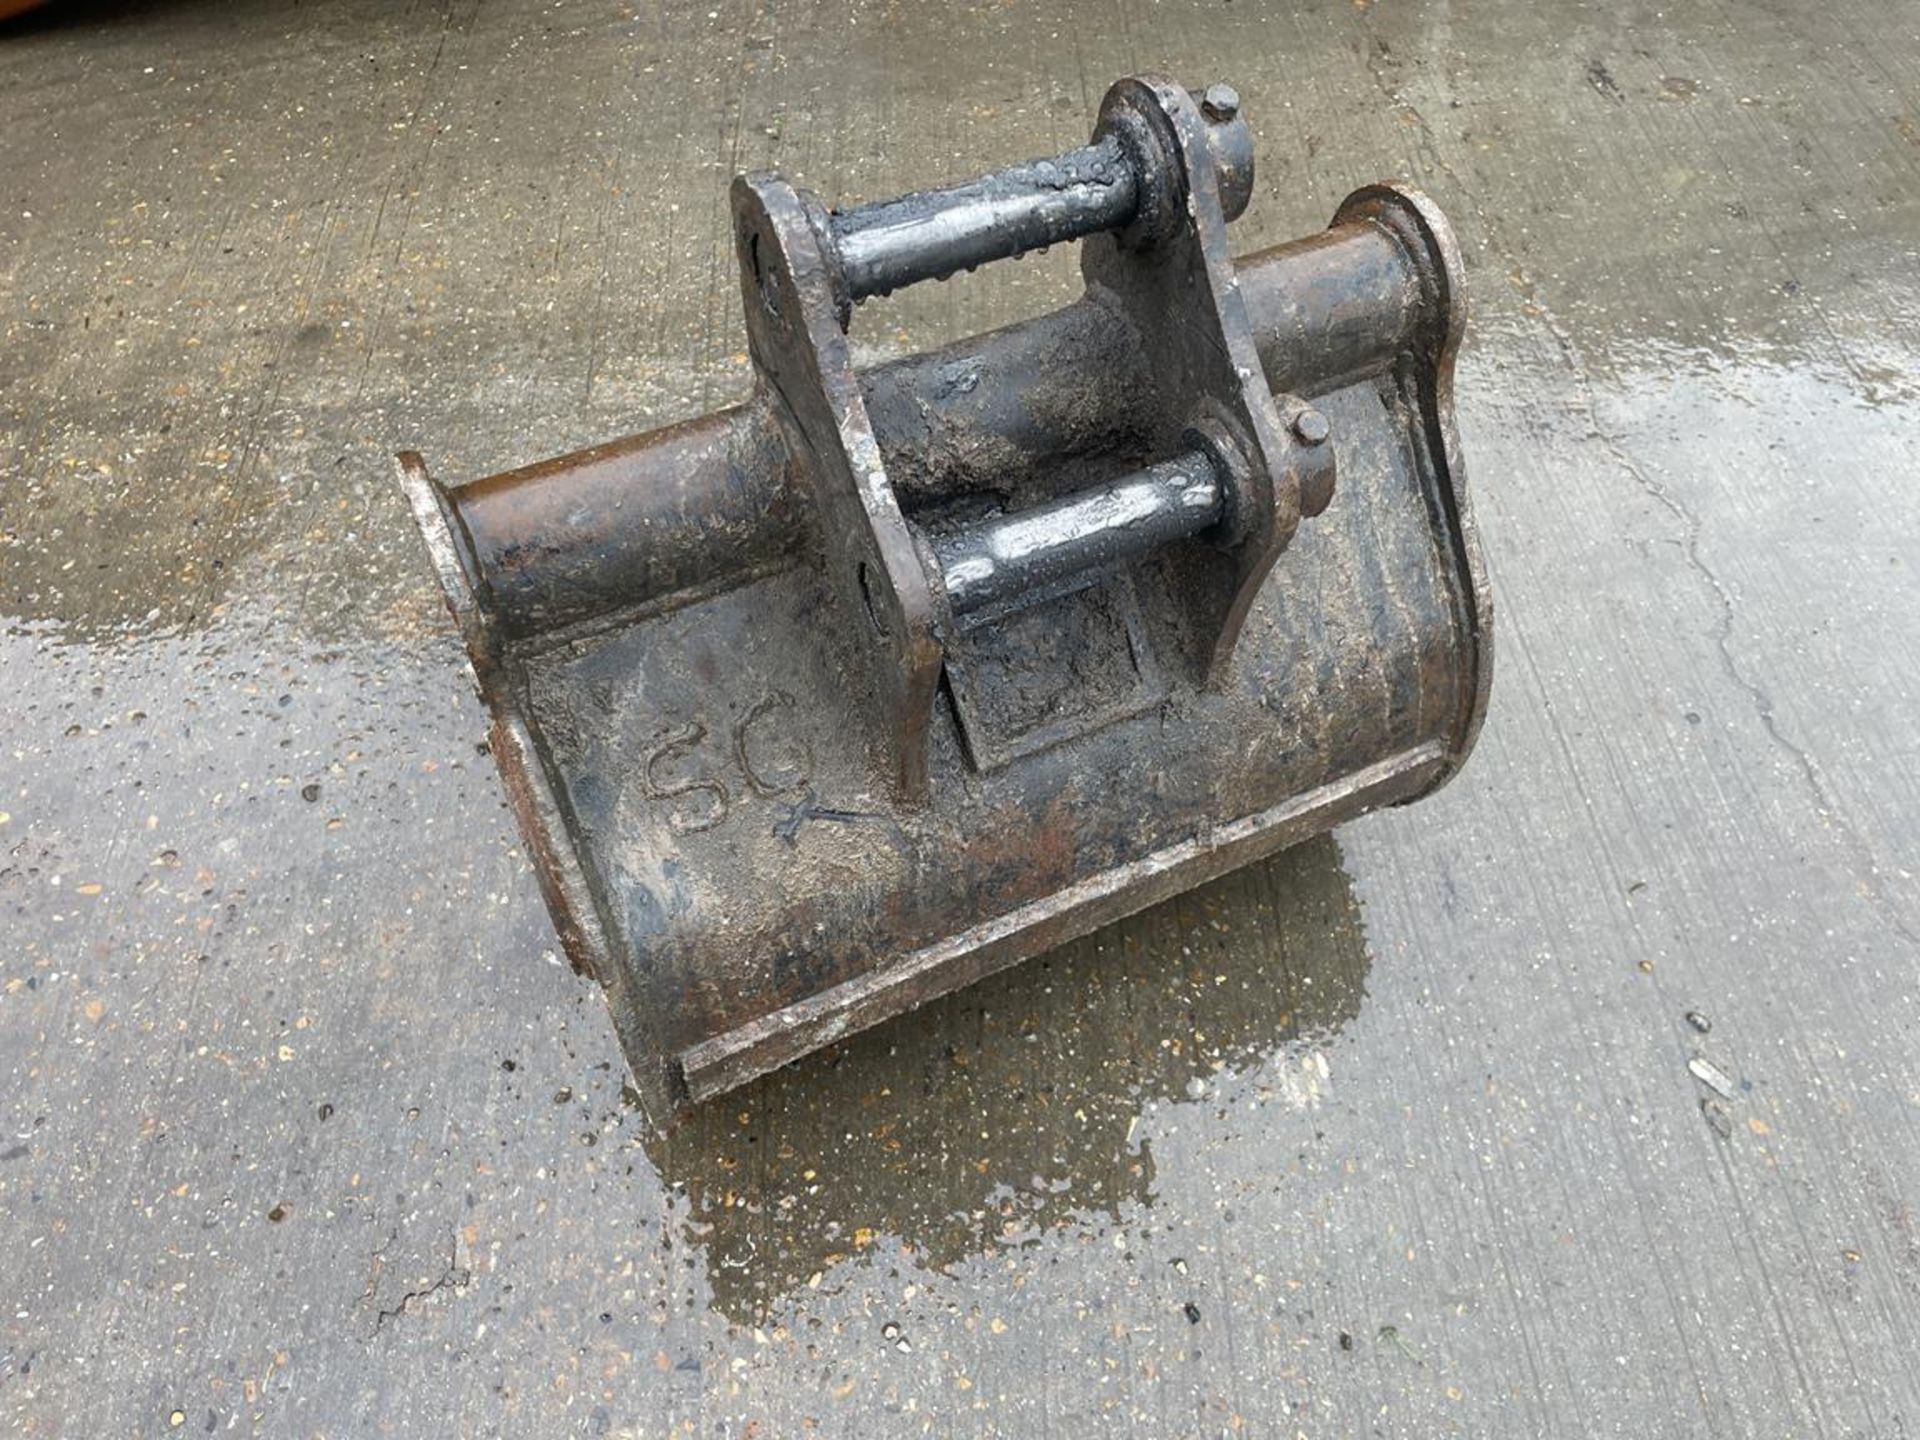 Strickland Excavator Bucket, Measures Approx 0.45x0.4m - Image 2 of 3